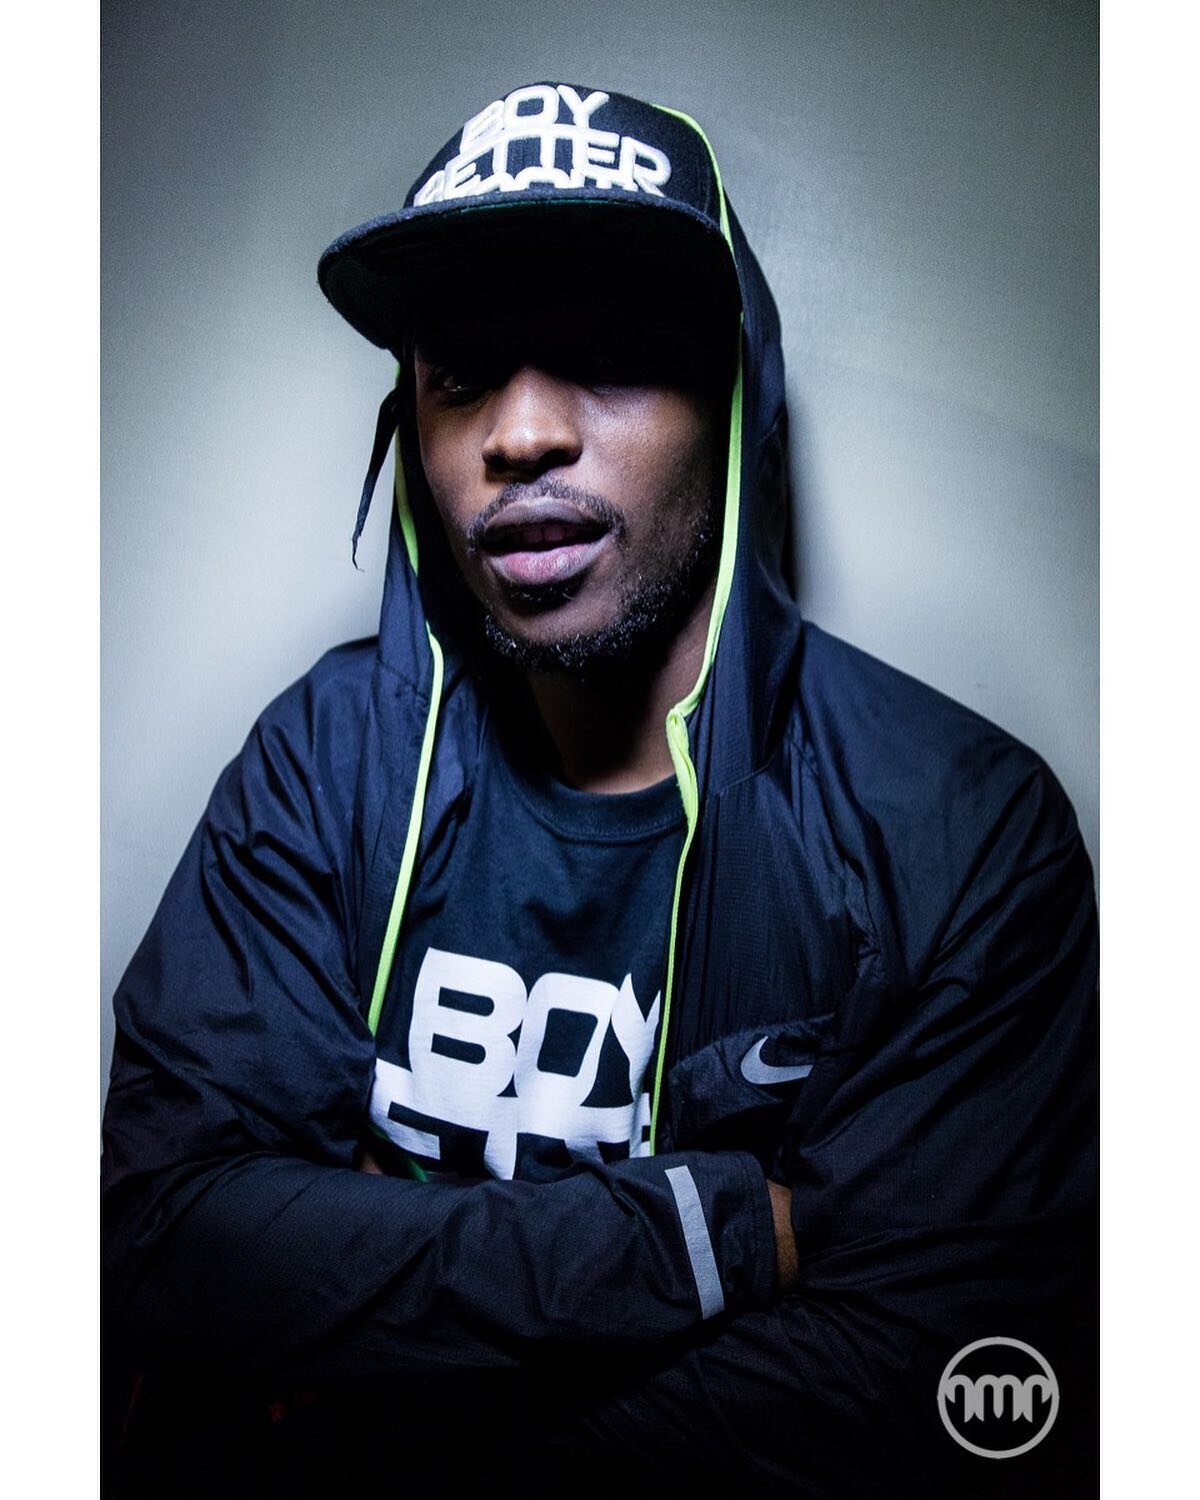 I had been a fan of @bbkupdates for a while but especially JME. And I was lucky to snap a 30seconds.com portrait of him backstage after BBK played @bestival 2014. Such a nice guy too! Was super pleasant to have a chat with him. 
There&rsquo;s a photo